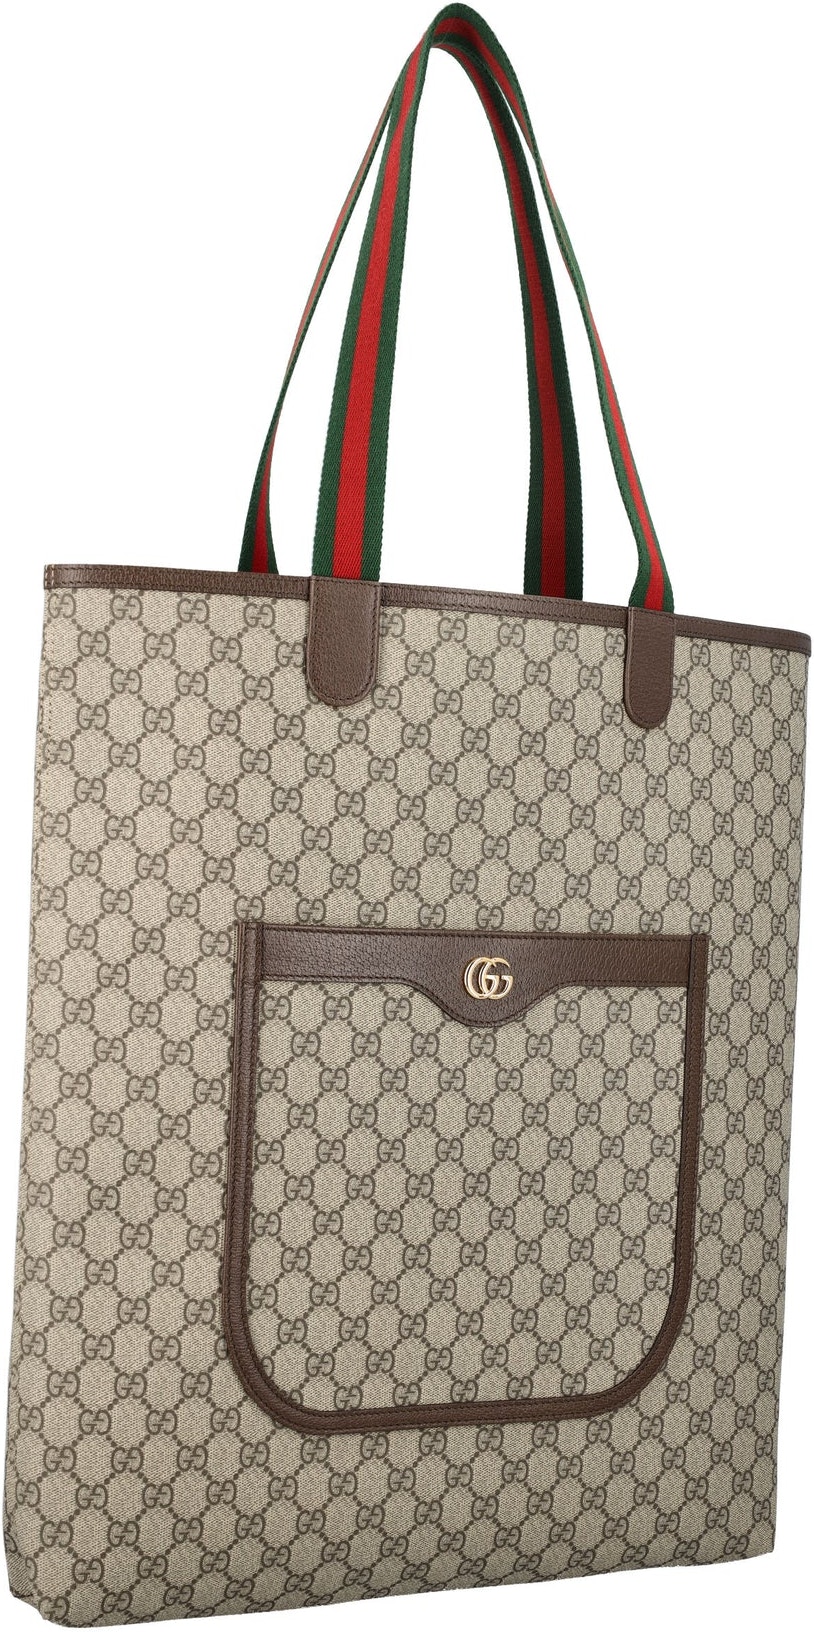 Shop GUCCI Ophidia GG large tote bag ( 744542 ) by Eliza08